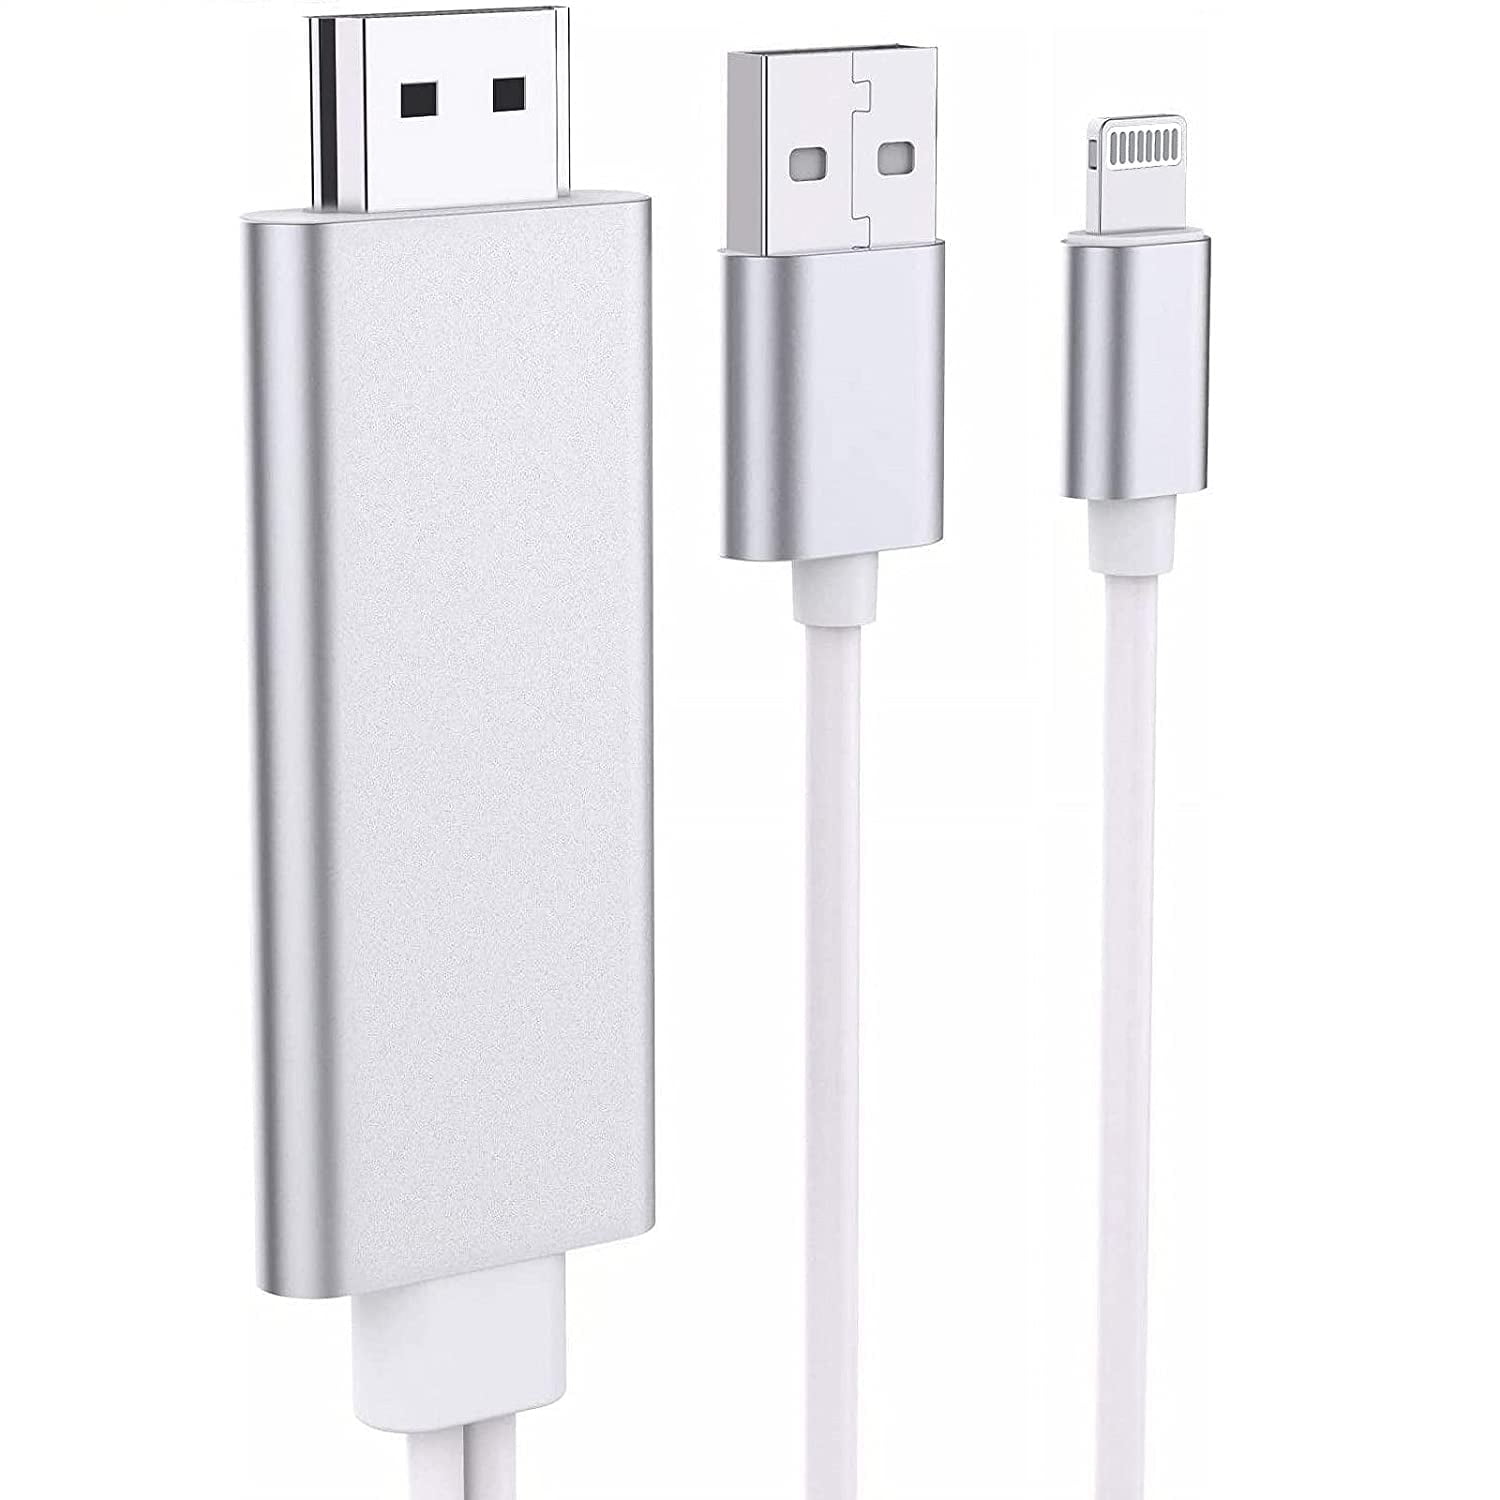 Kom forbi for at vide det Livlig Permanent Lightning to HDMI Cable Adapter Compatible for iPhone iPad to TV, 6.5ft  Apple MFi Certified Lightning Digital AV Adapter 1080p HDTV Connector Cable  for iPhone iPad iPod to TV Projector Monitor, Silver -